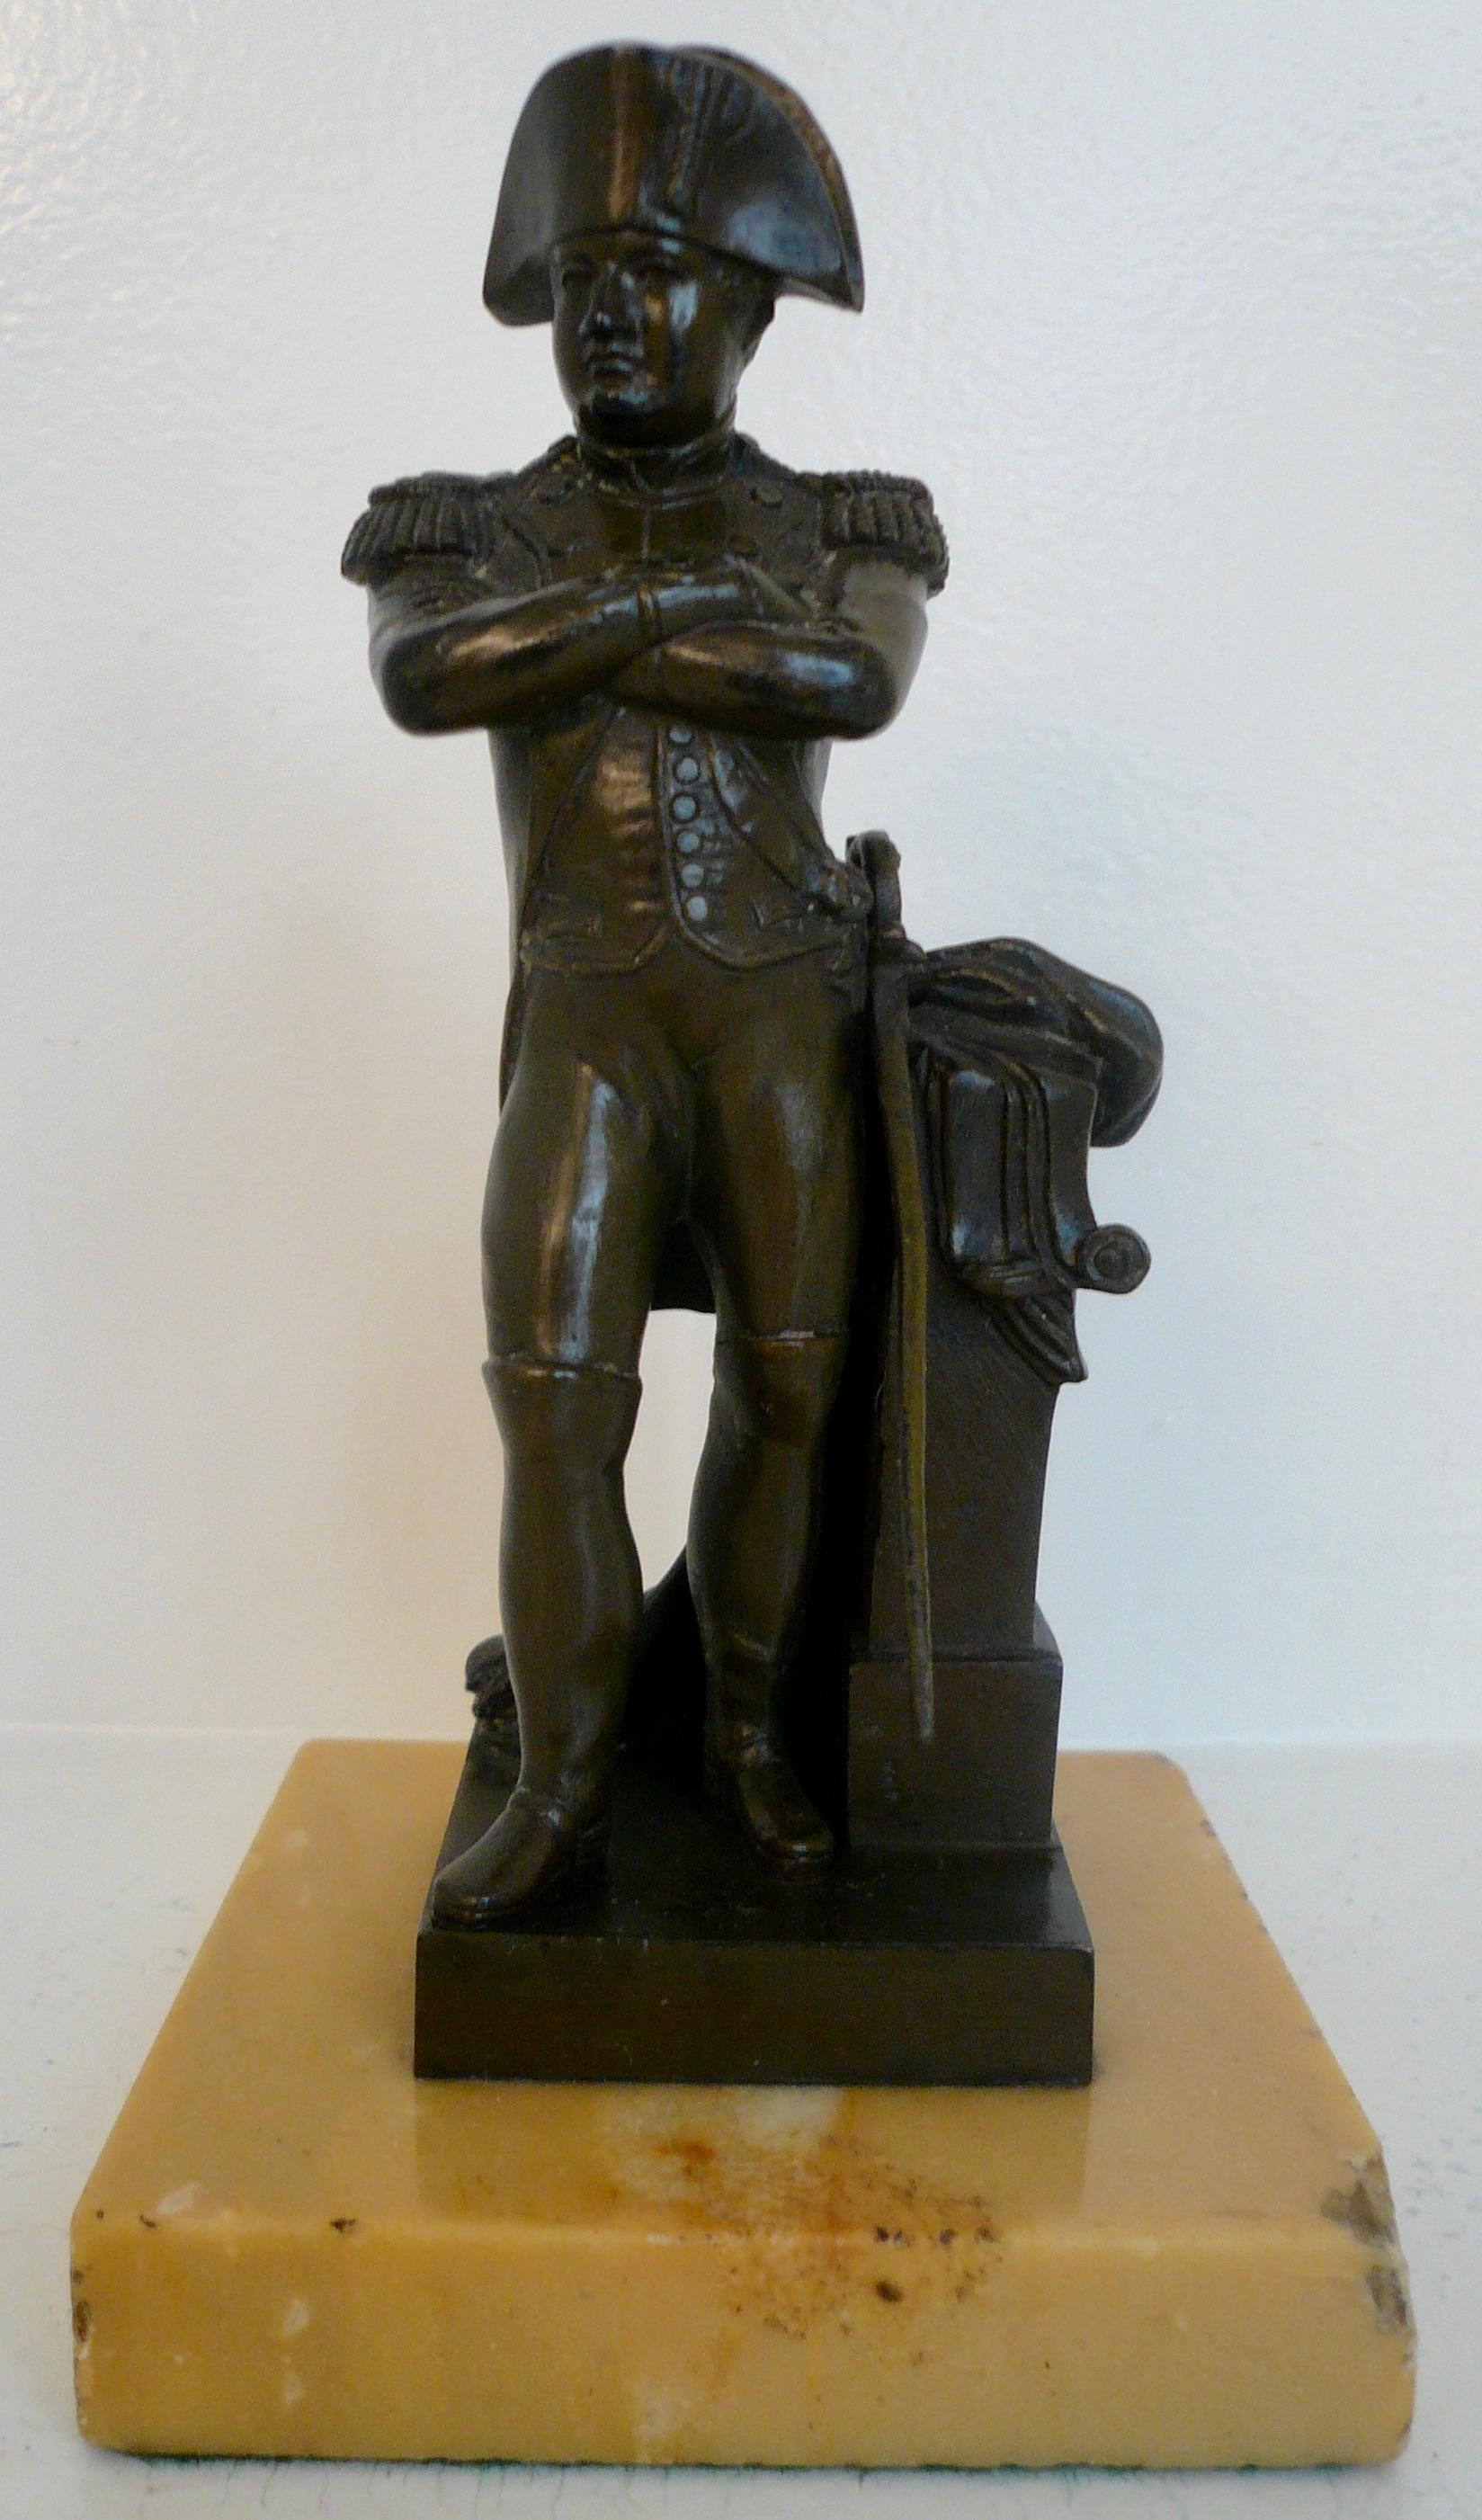 This finely detailed bronze figure of Napoleon is beautifully patinated, and is mounted on a Sienna marble base.